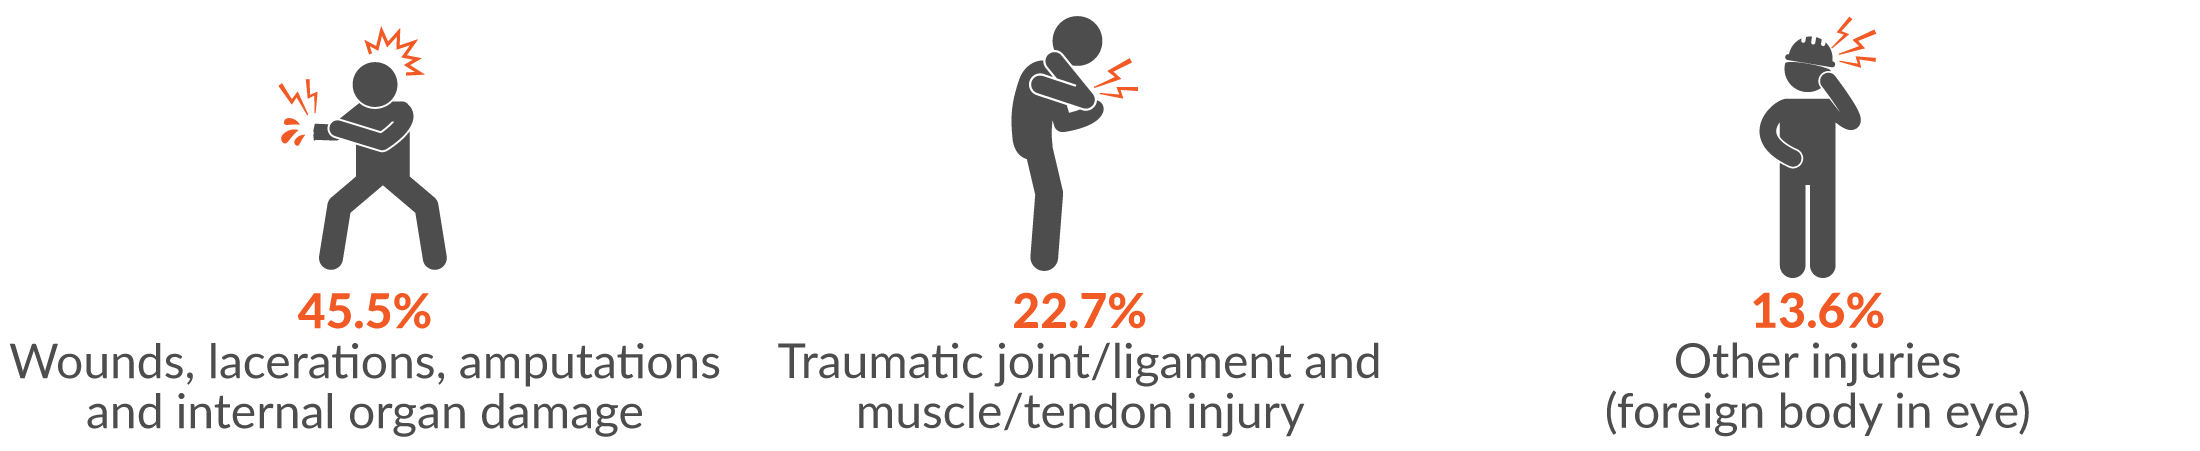 45.5% wounds, lacerations, amputations and internal organ damage; 22.7% traumatic joint/ligament and muscle/tendon injury; and 13.6% other injuries (foreign body in eye).